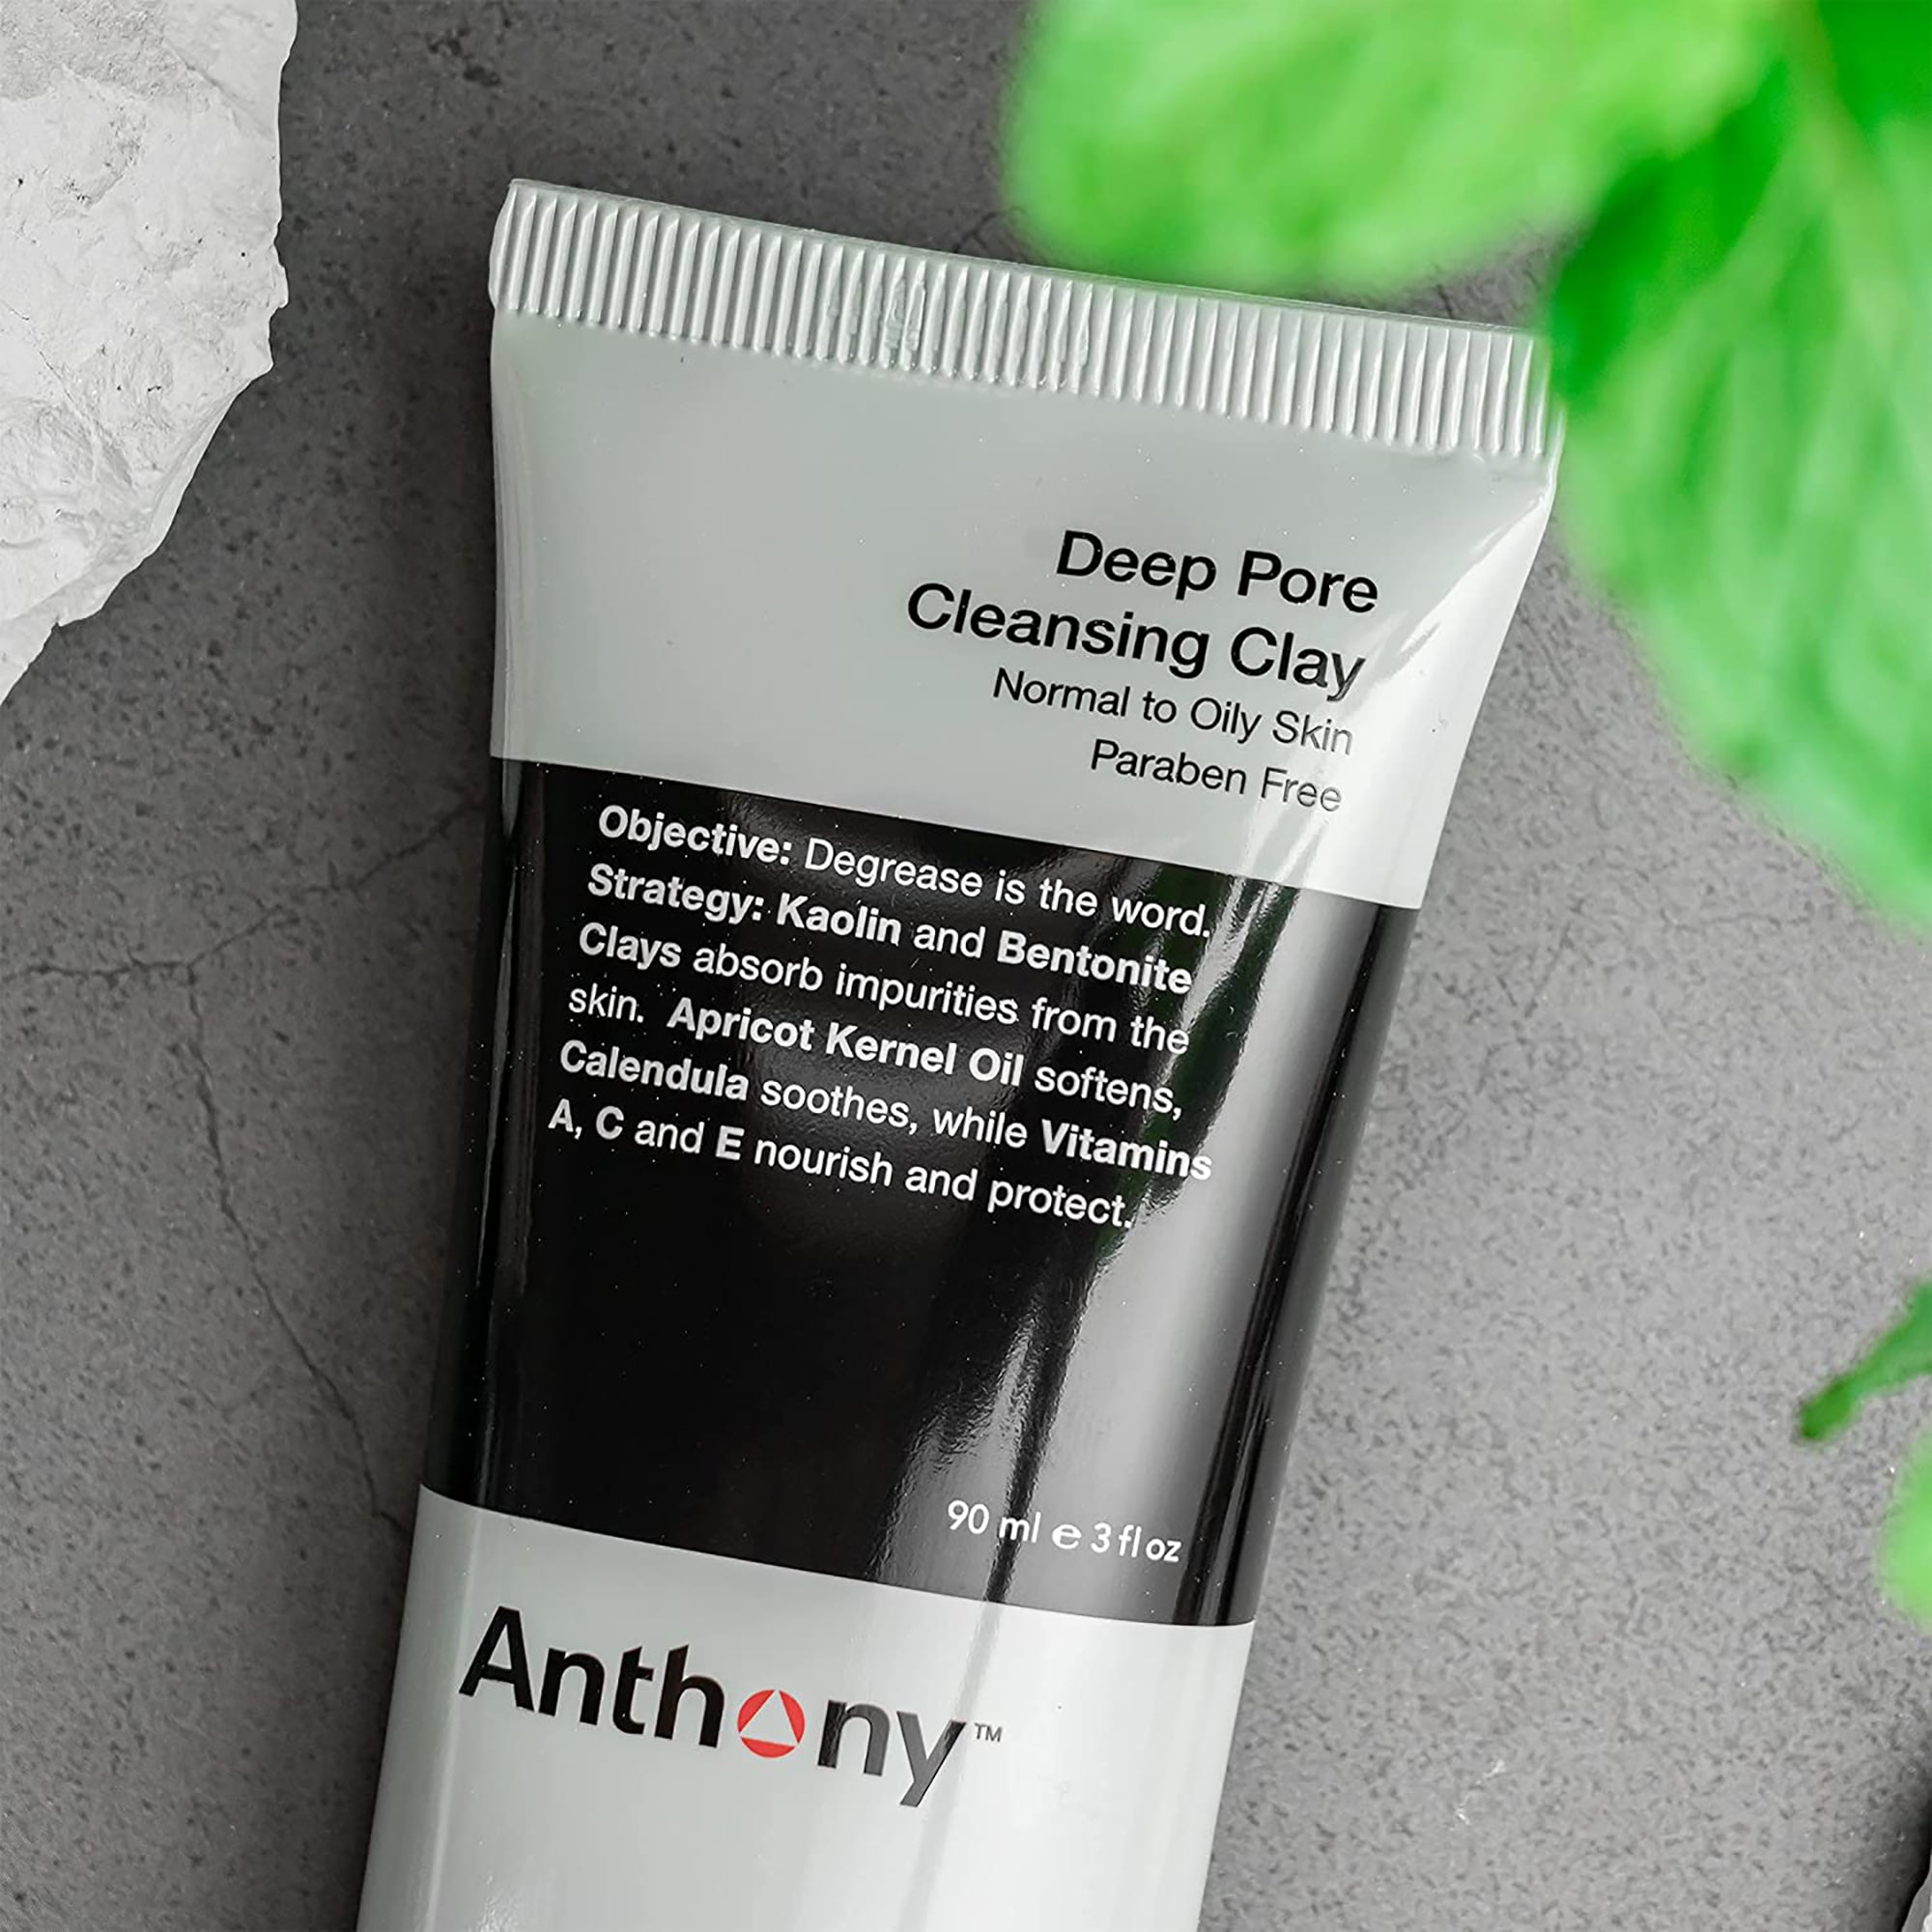 Anthony Deep Pore Cleansing Clay / 3.OZ